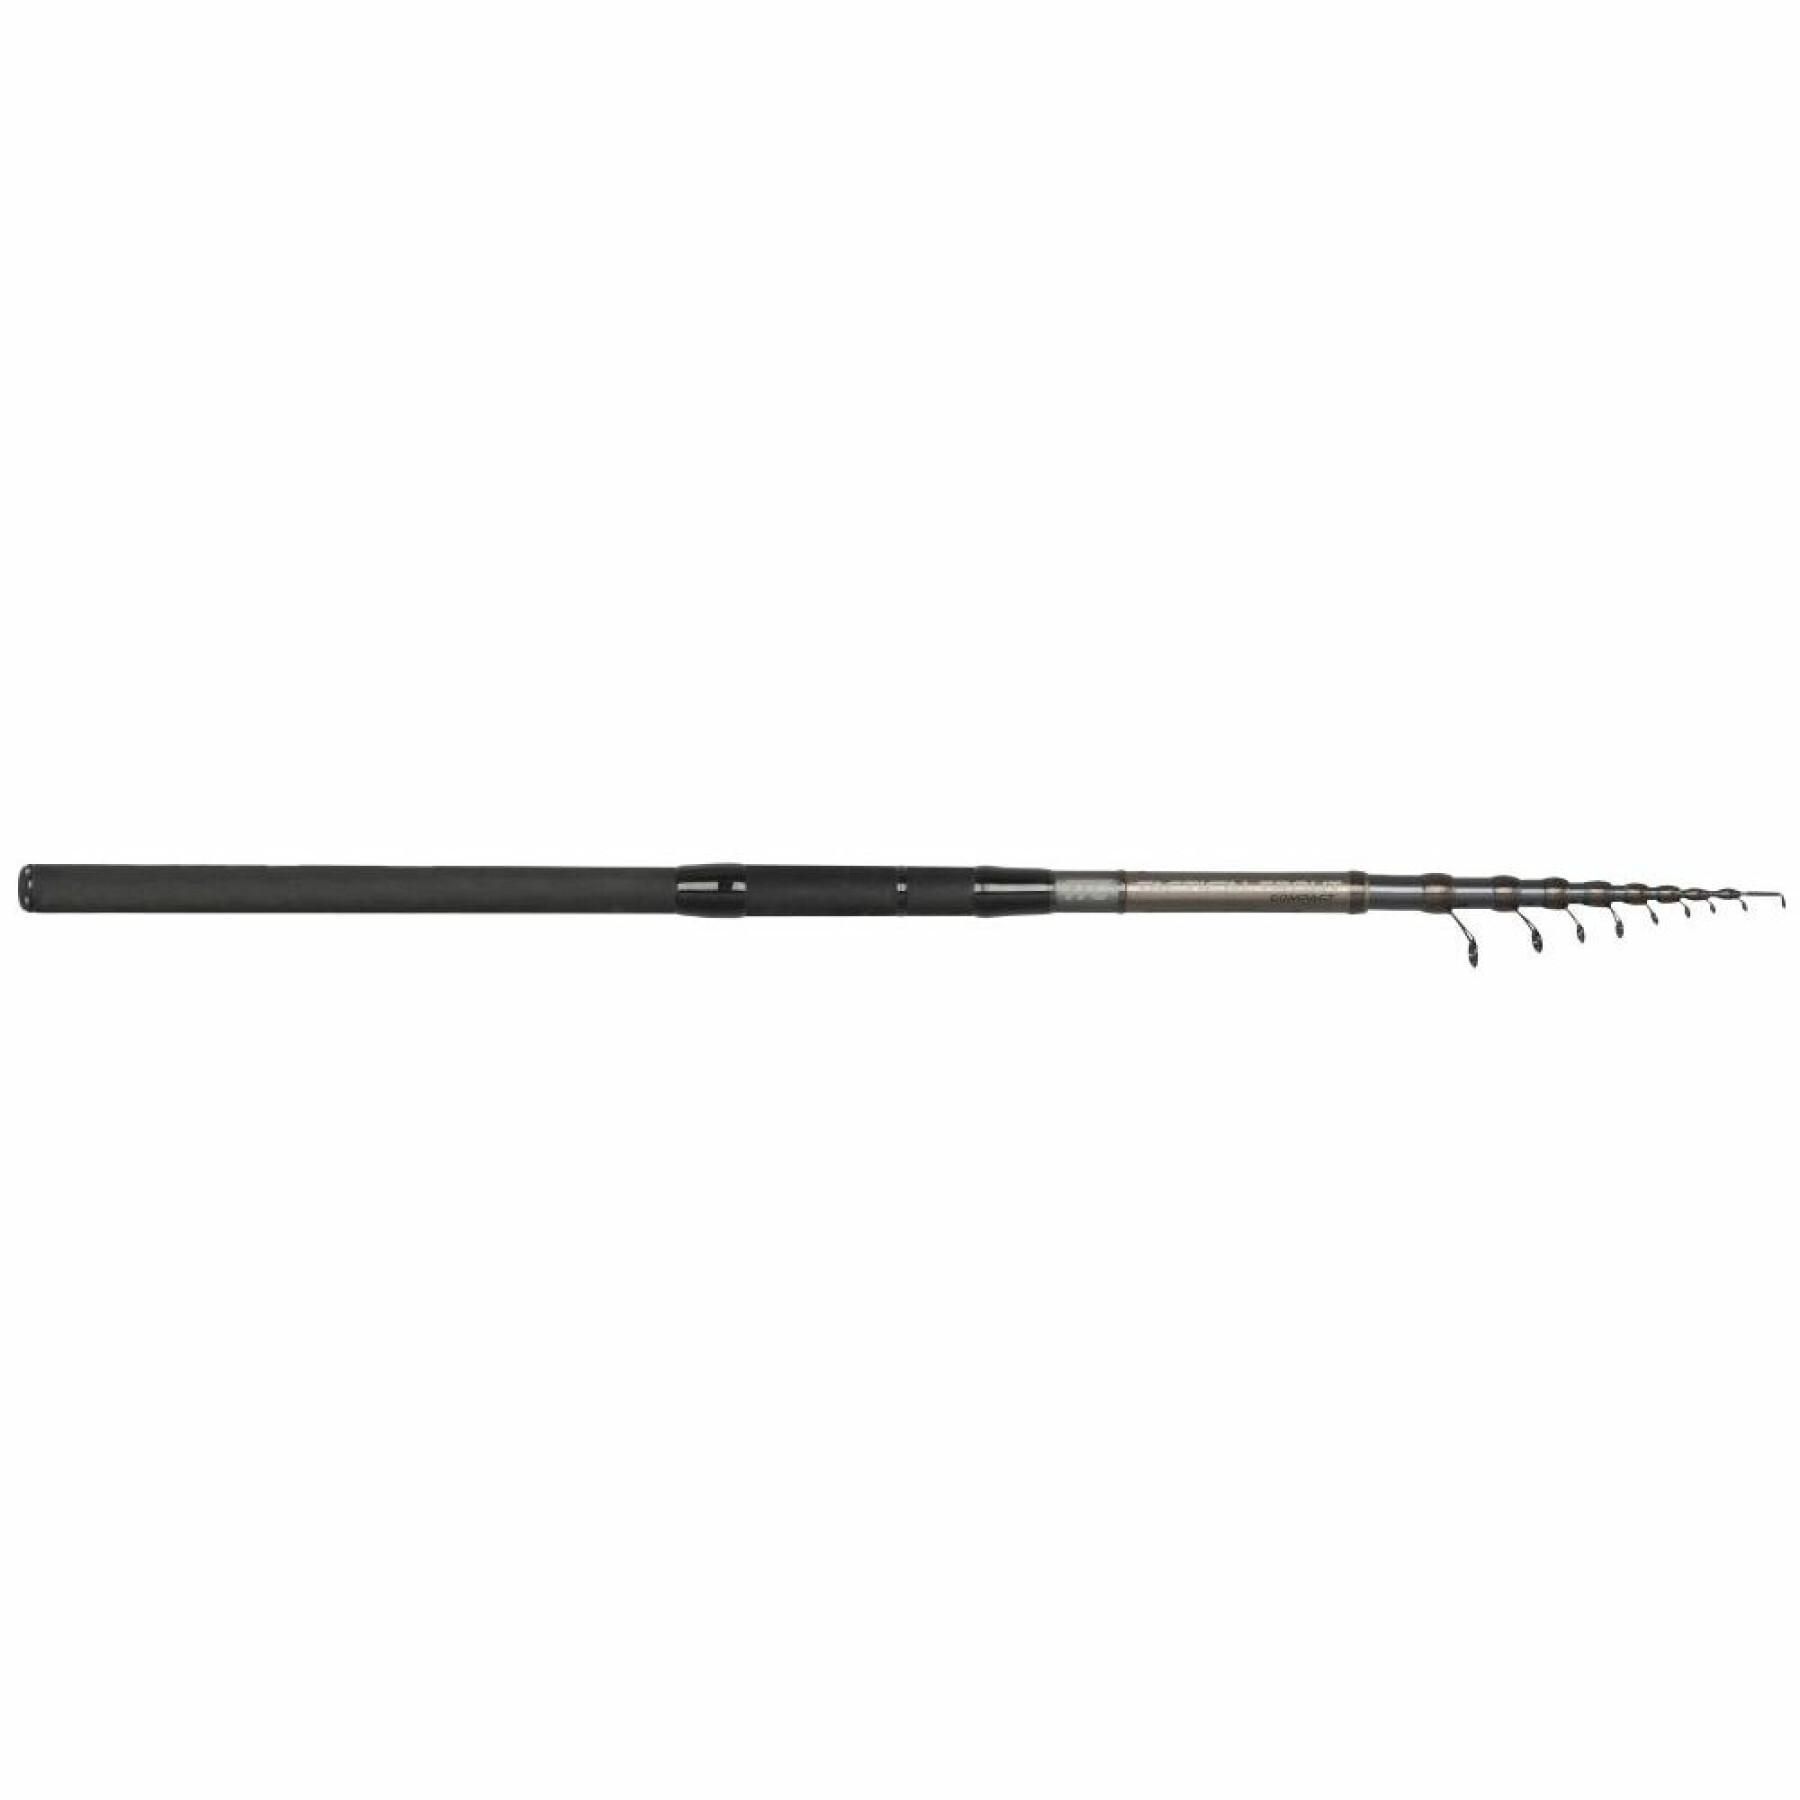 Canna da spinning Spro tactical trout compact 5-25g